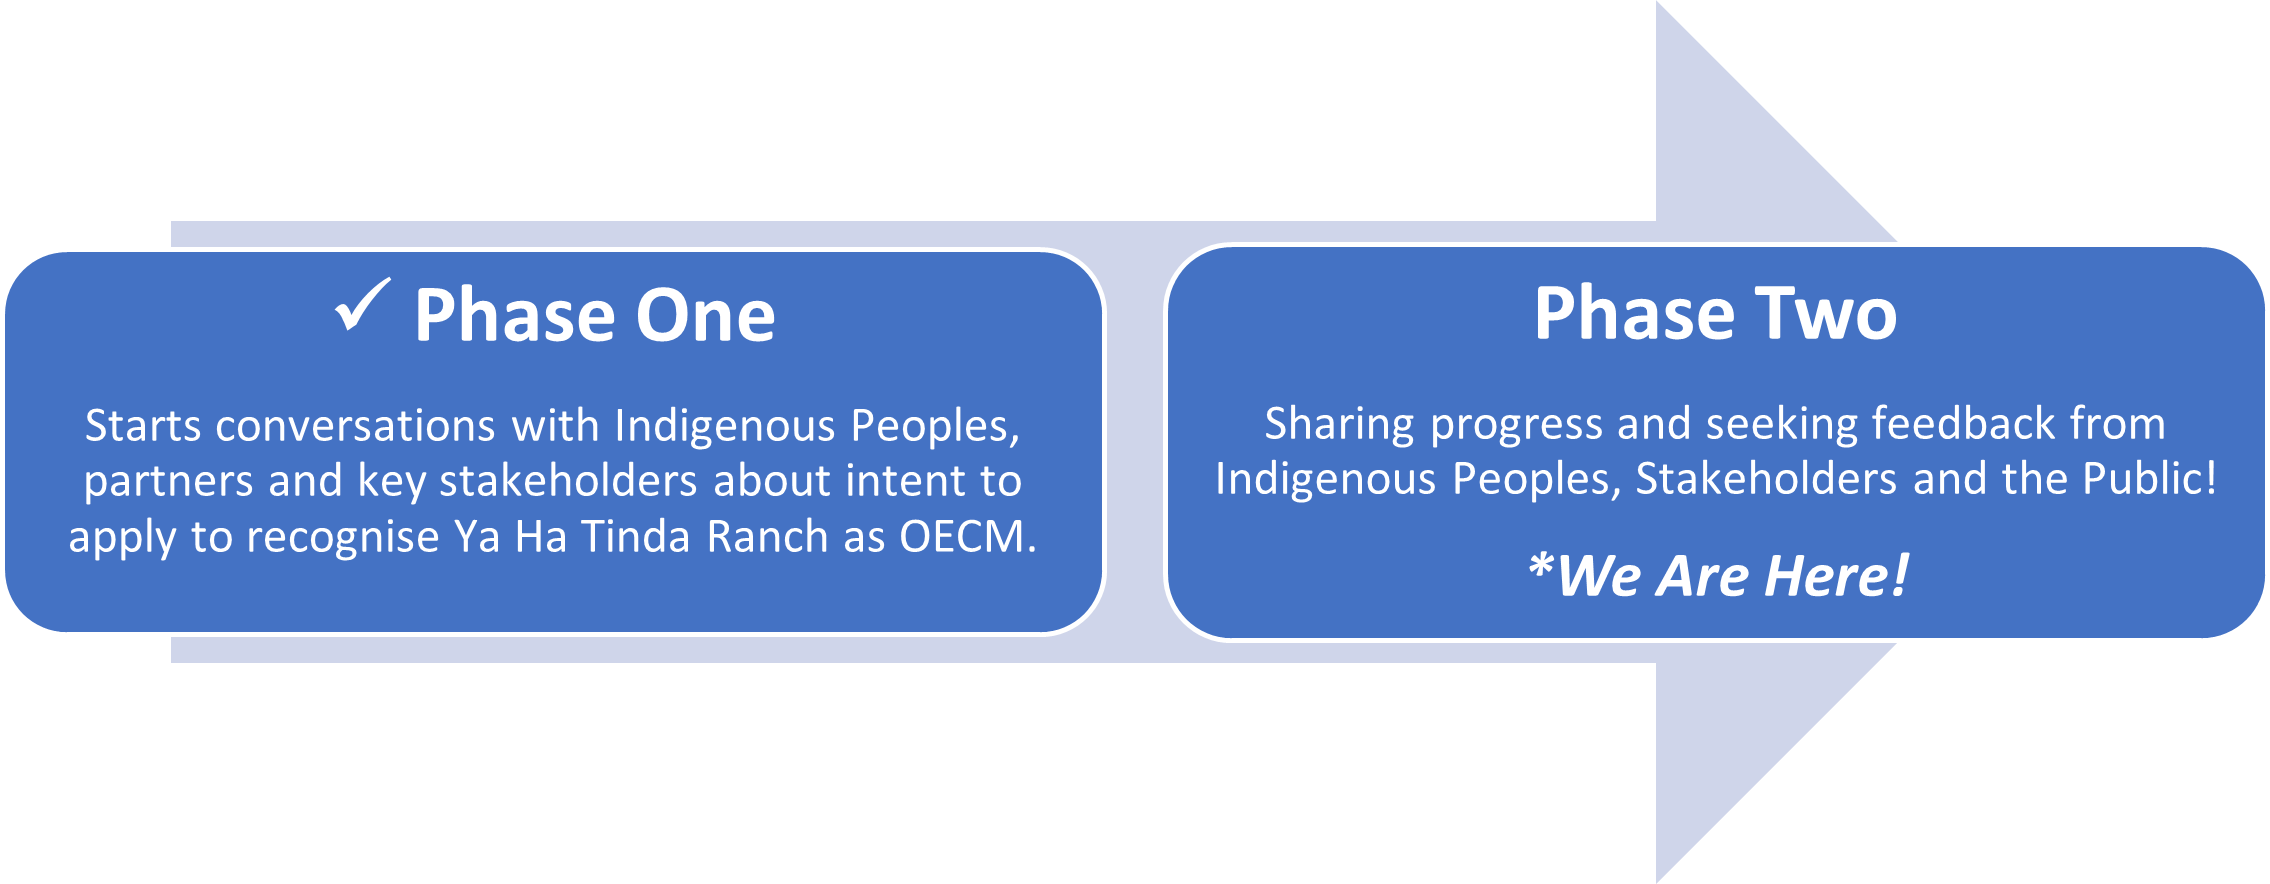 Phase One  Early conversations with Indigenous Peoples and key stakeholders about intent to apply to recognize Ya Ha Tinda Ranch as an OECM. Phase Two - We Are Here! Sharing progress and seeking feedback from Indigenous Peoples, stakeholders, and the public!